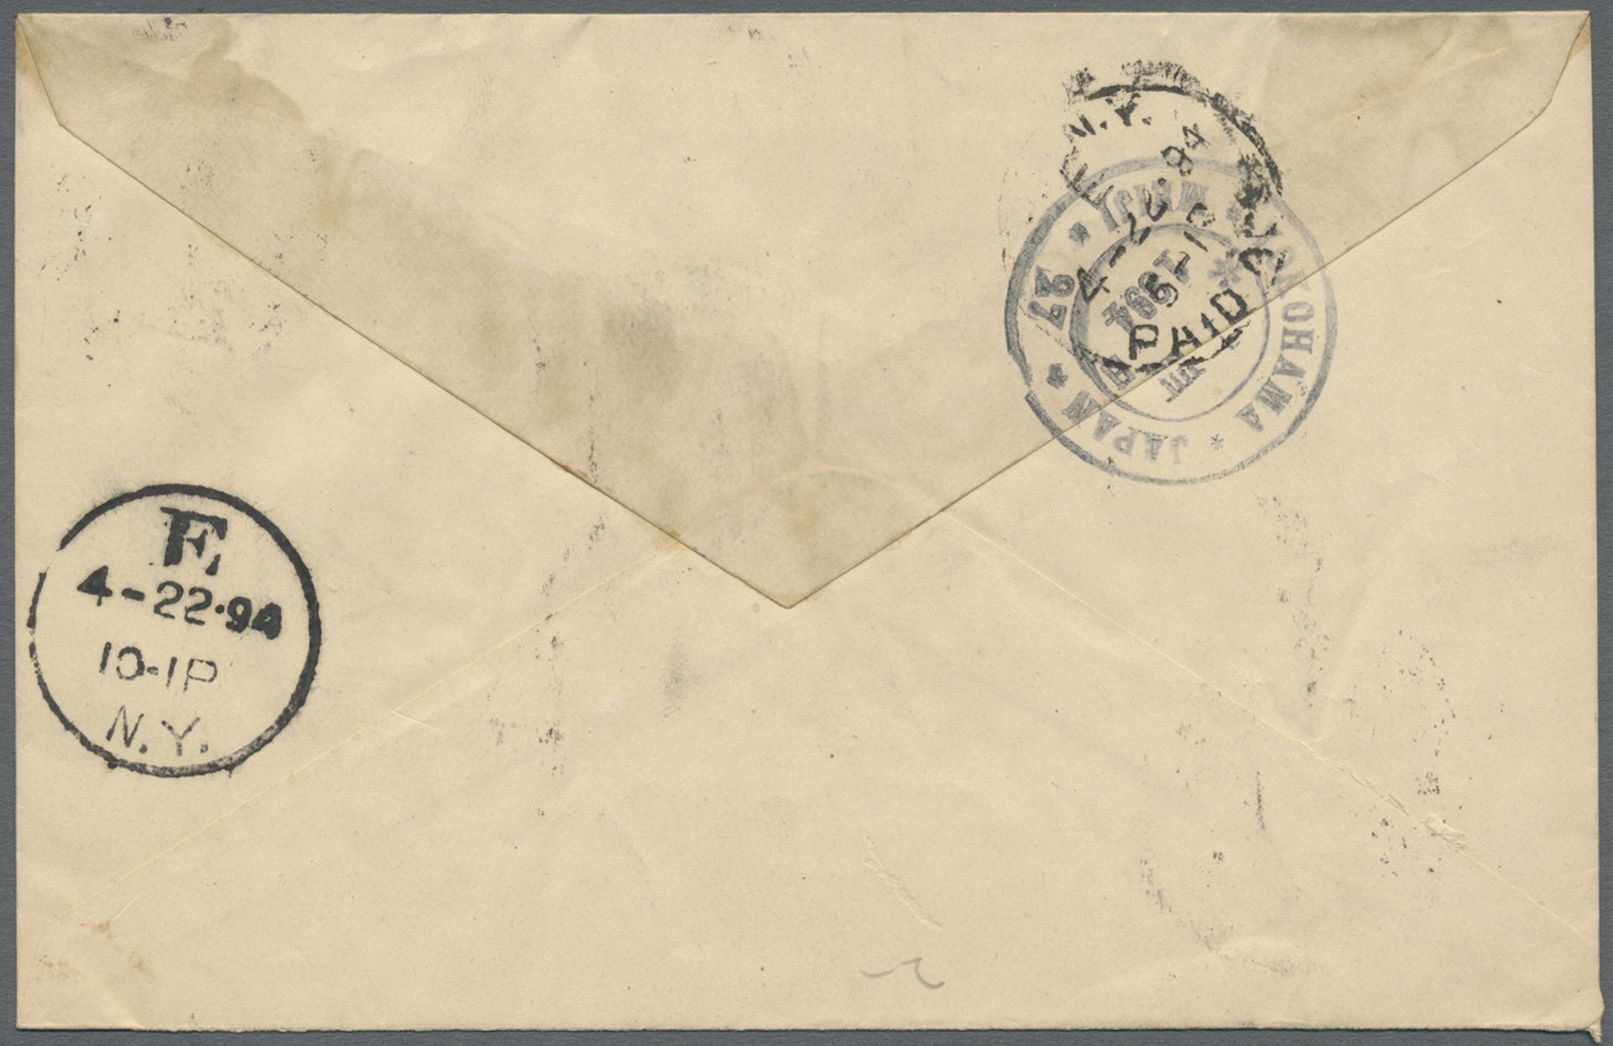 GA Japanische Post In China: 1888, Koban Envelope Small Size 2 S. Uprated Silver Wedding 2 S. And UPU Koban 1 S. (right - 1943-45 Shanghai & Nankin